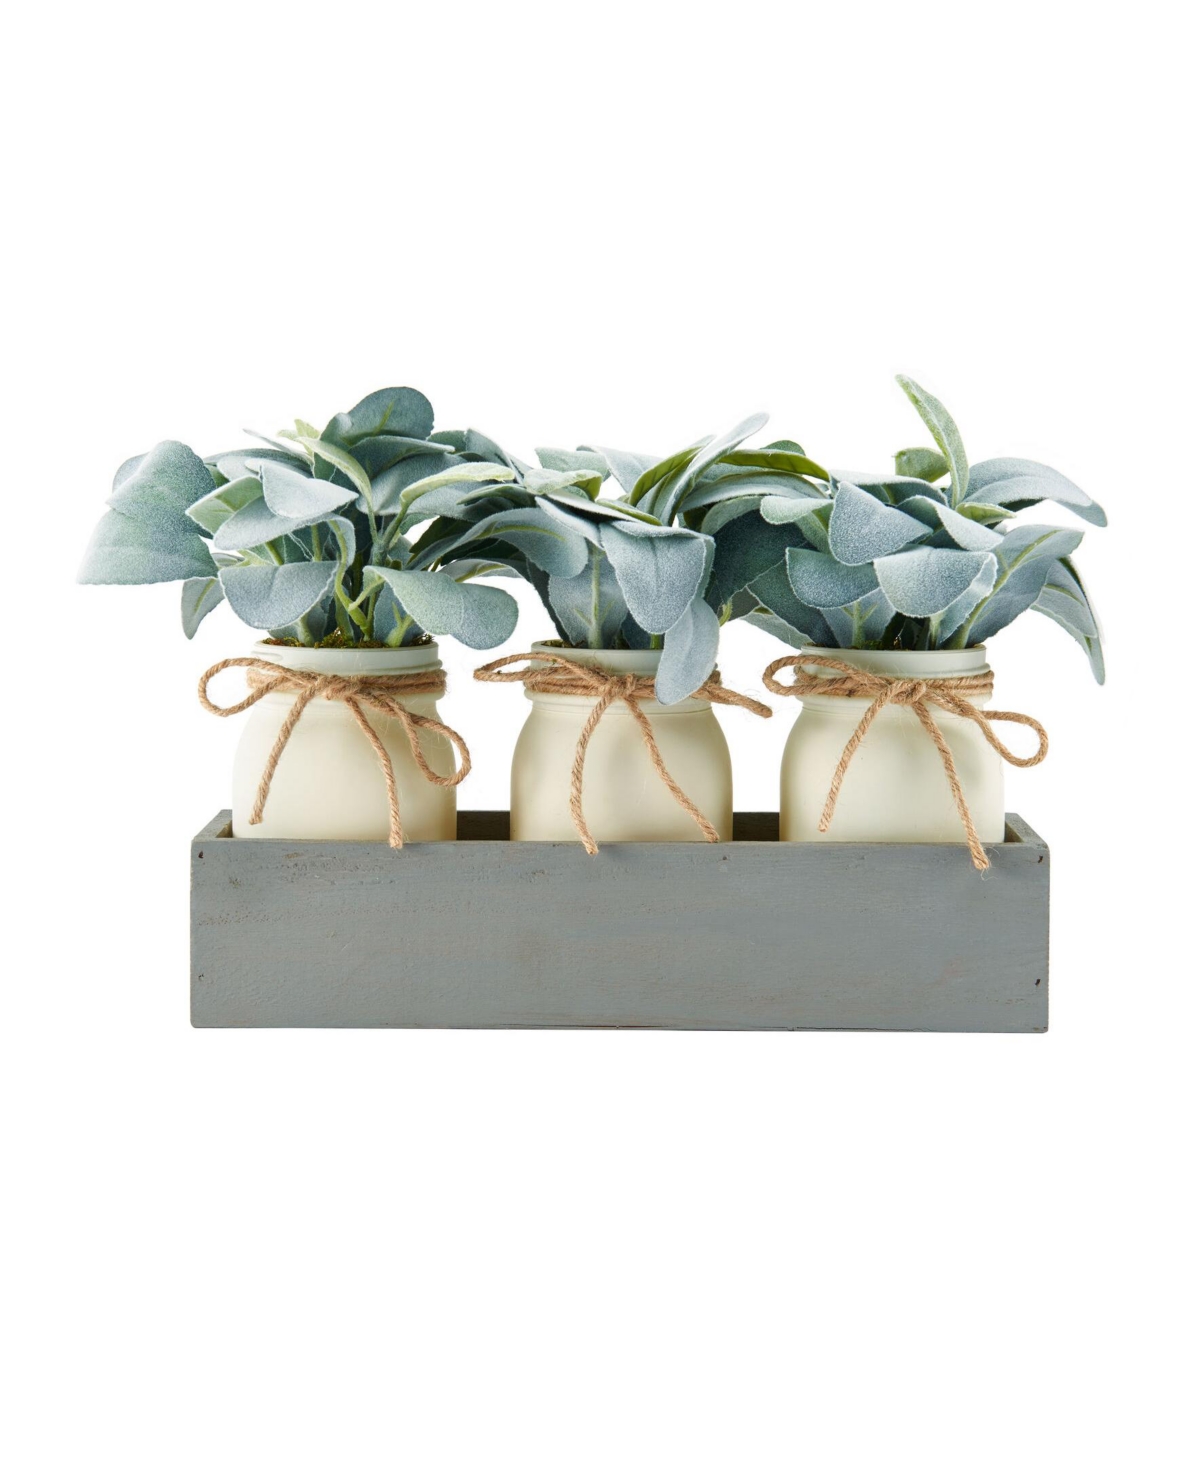 Elements 9 Artificial Sage Greenery by Elements, 3 Piece